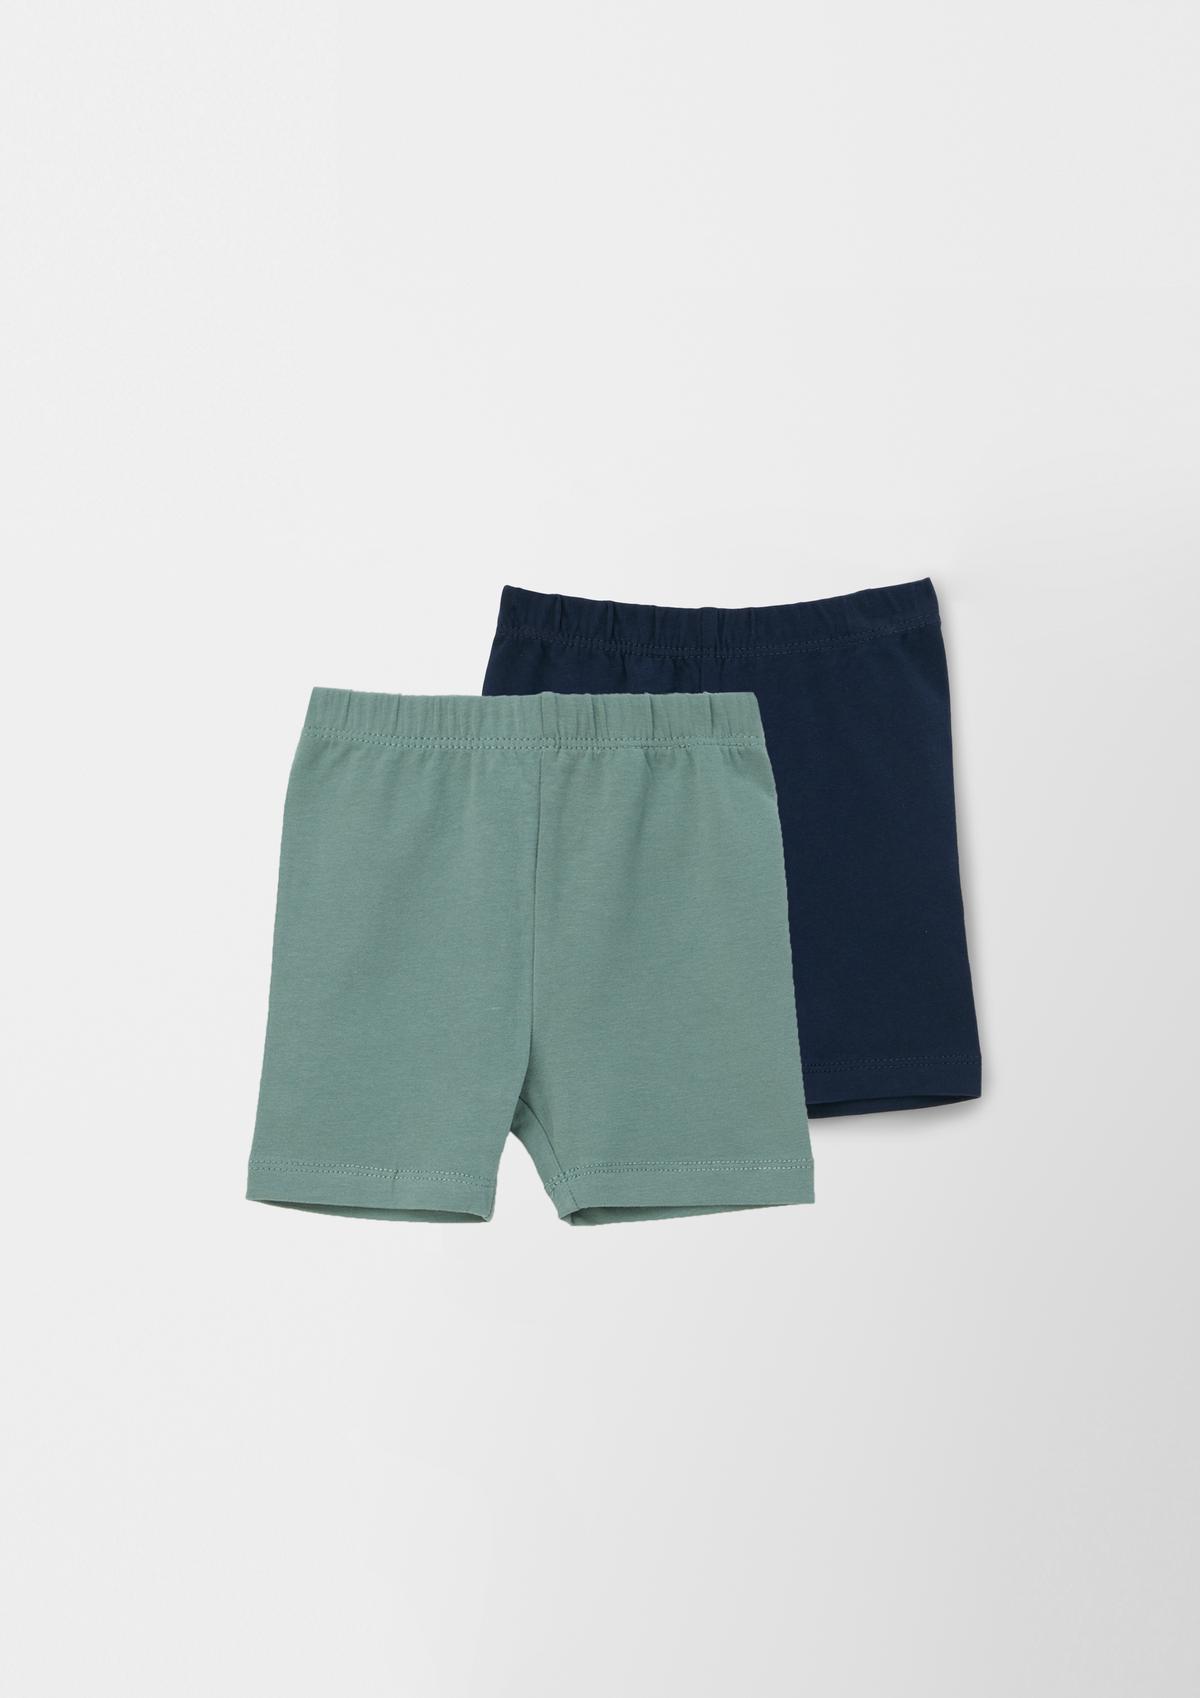 s.Oliver Jersey shorts in a double pack